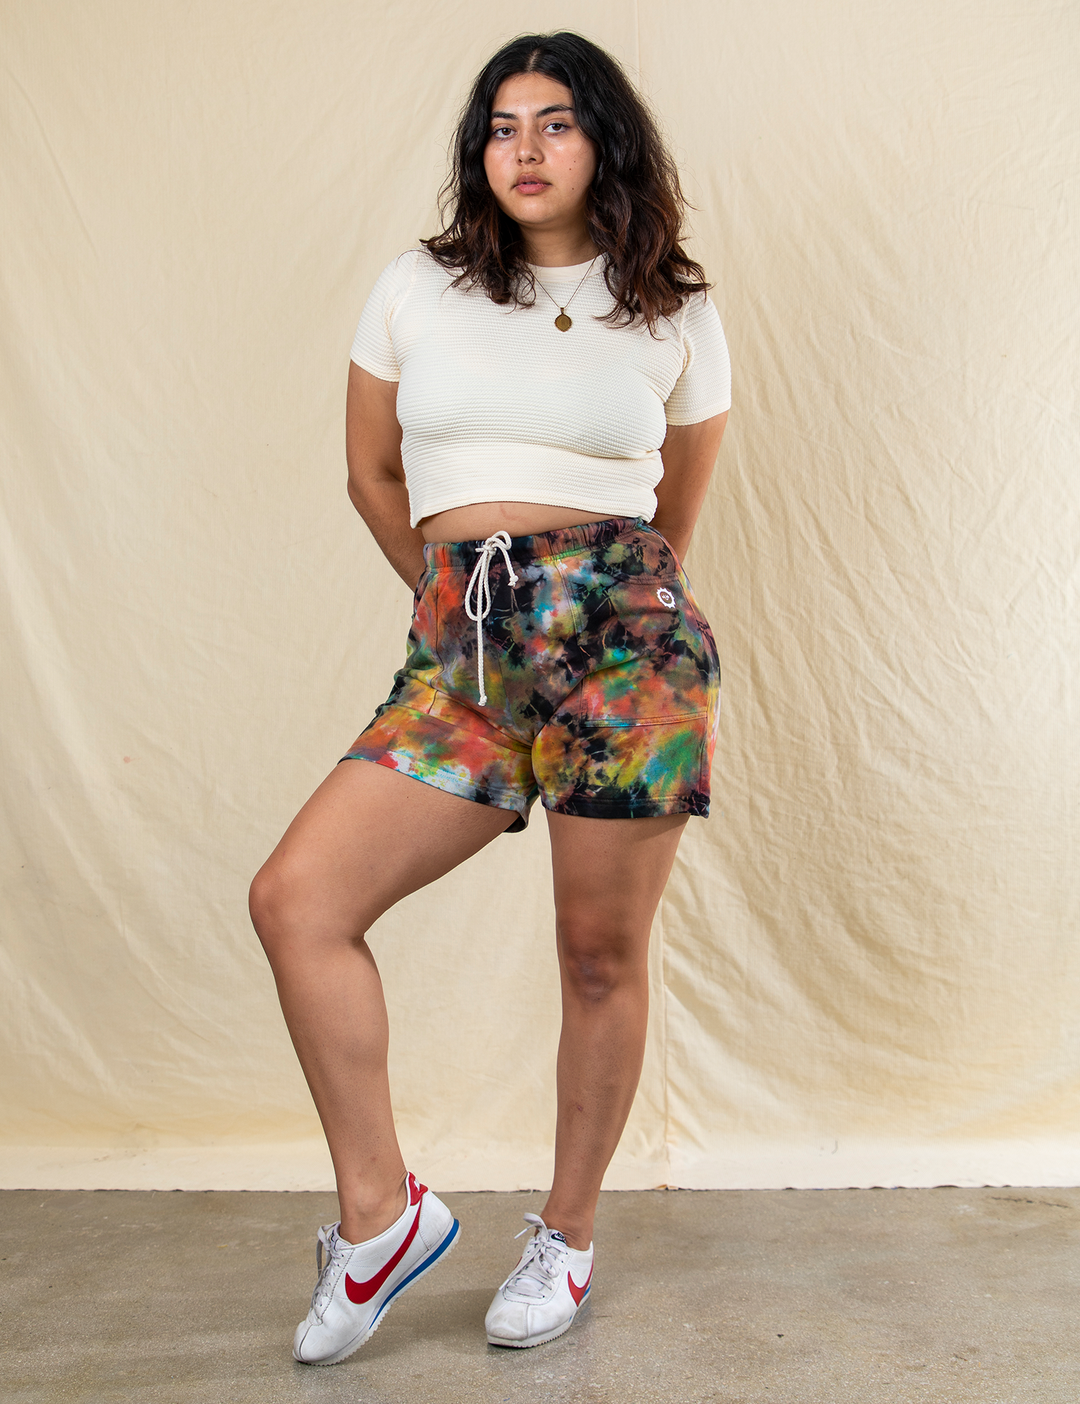 Model wearing the mid-thigh length shorts with an elastic waistband and pockets